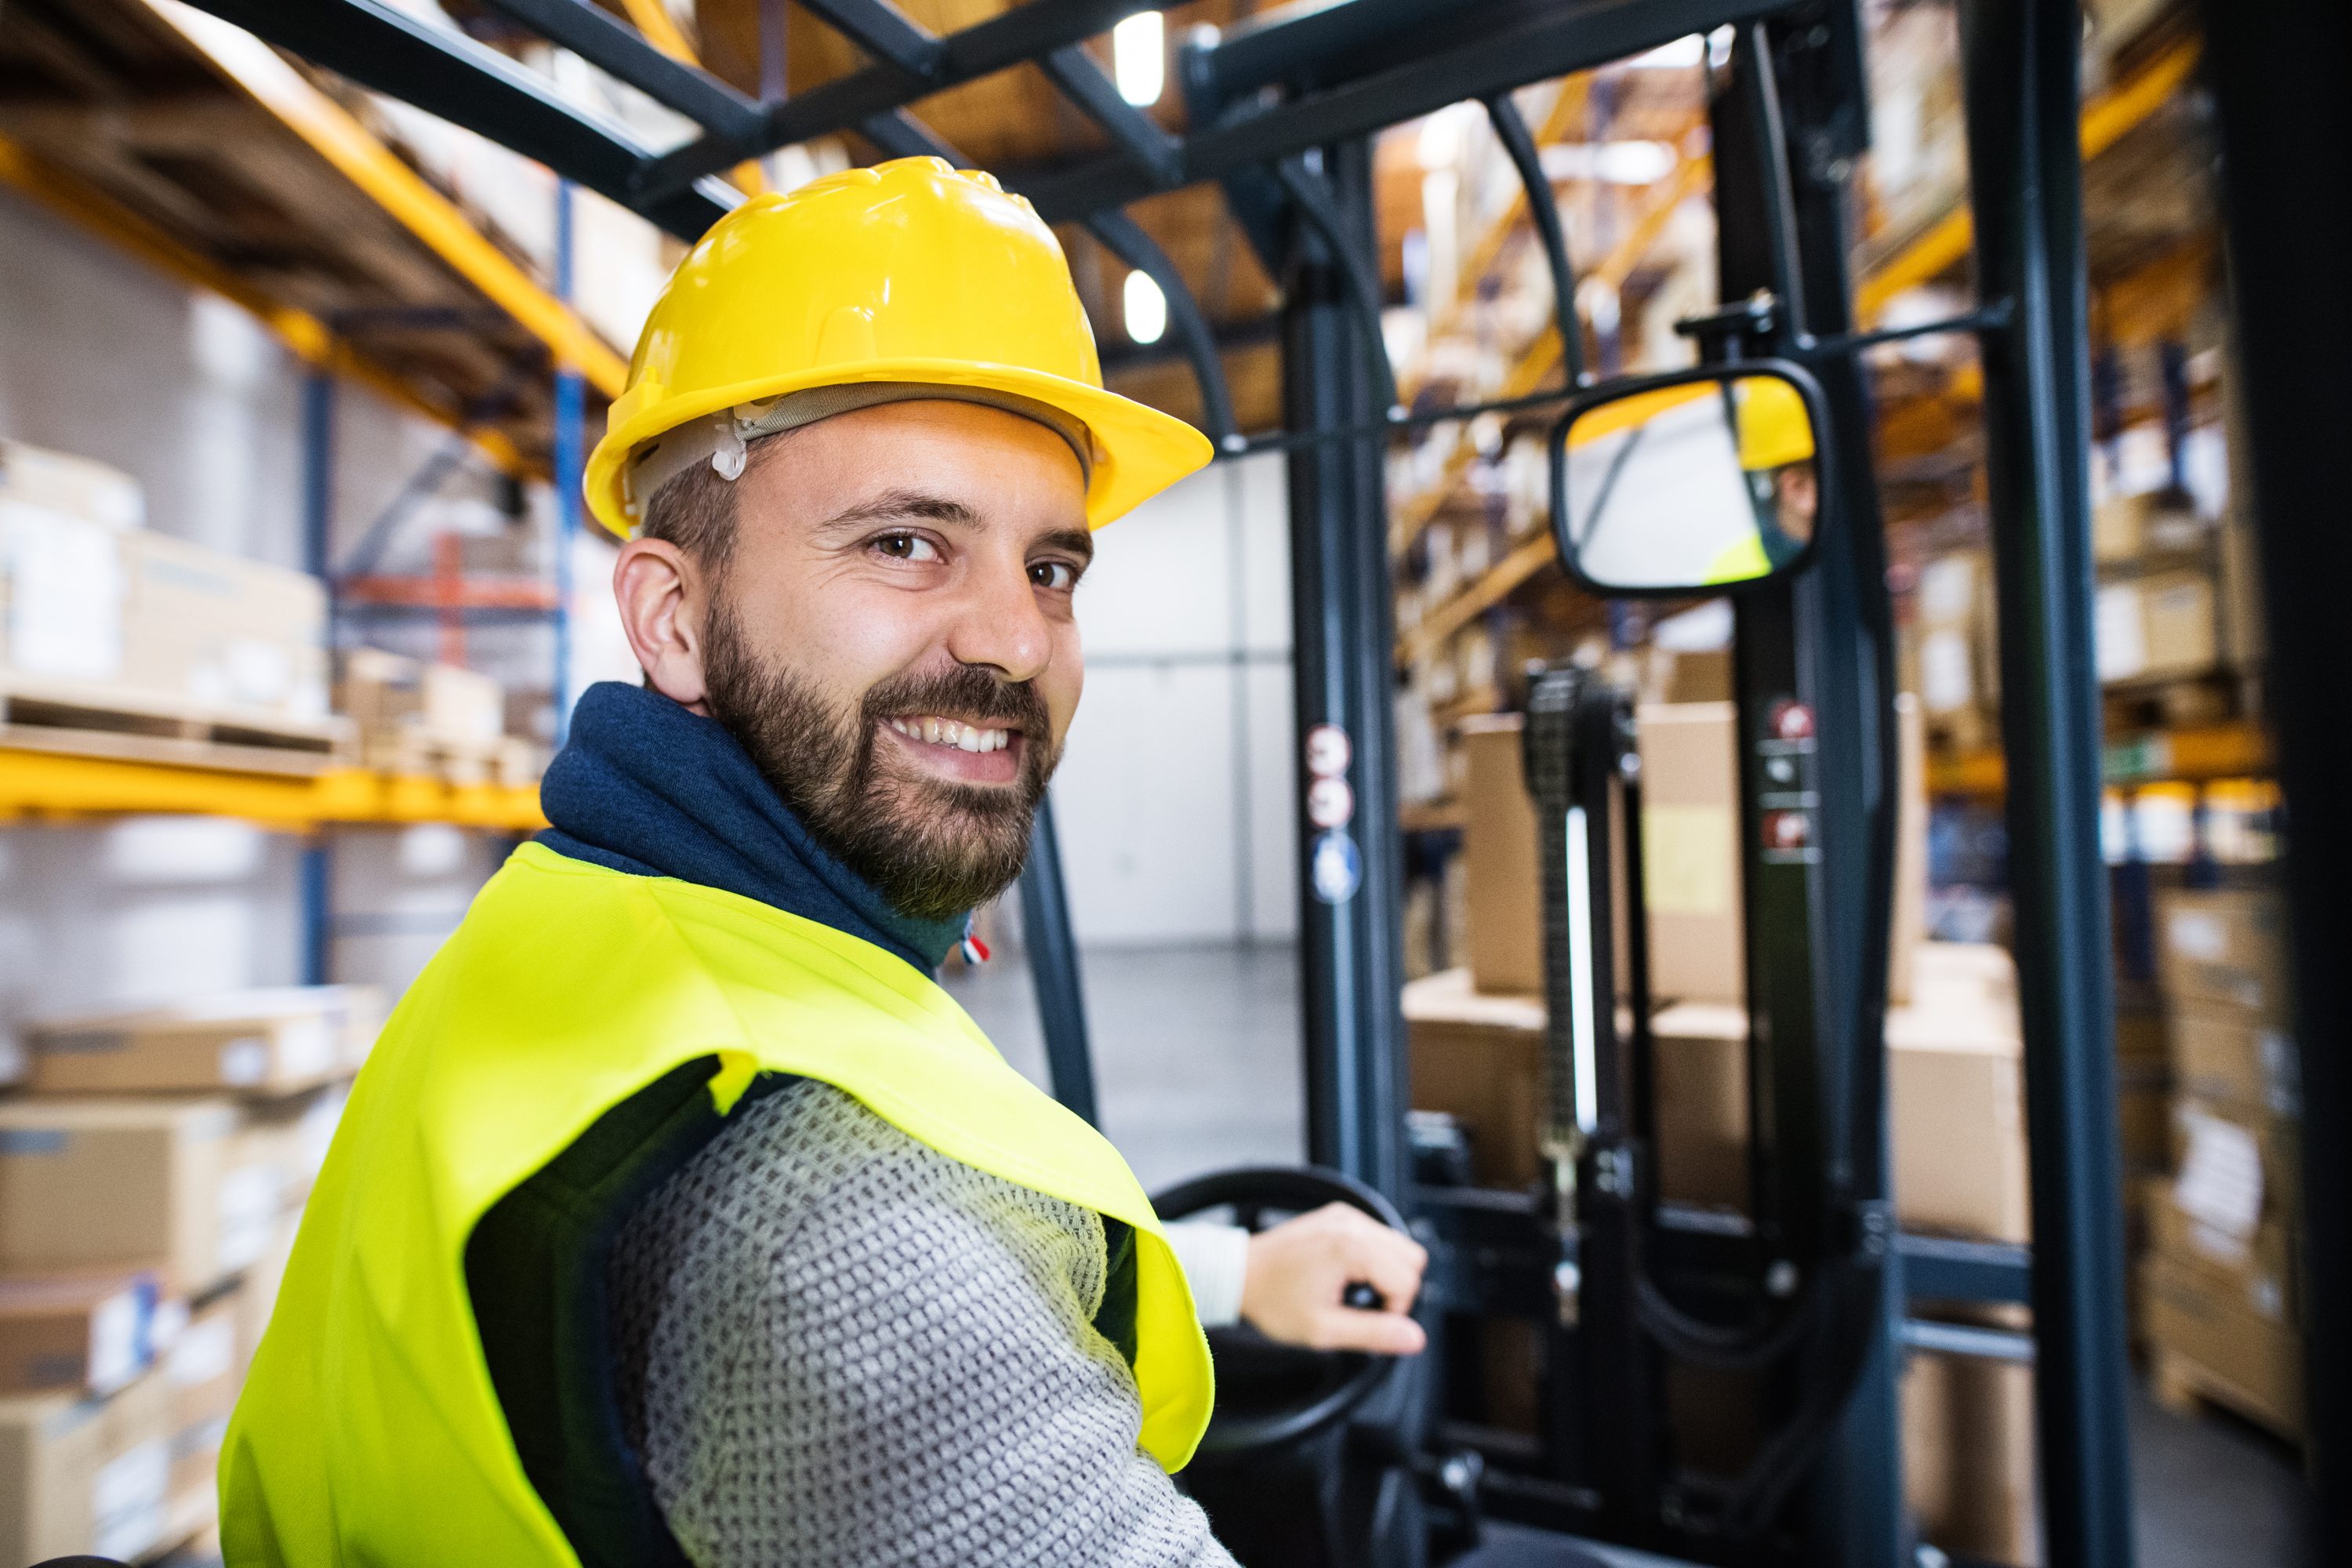 Recruitment Agency worker driving high reach Forklift Driver in warehouse.